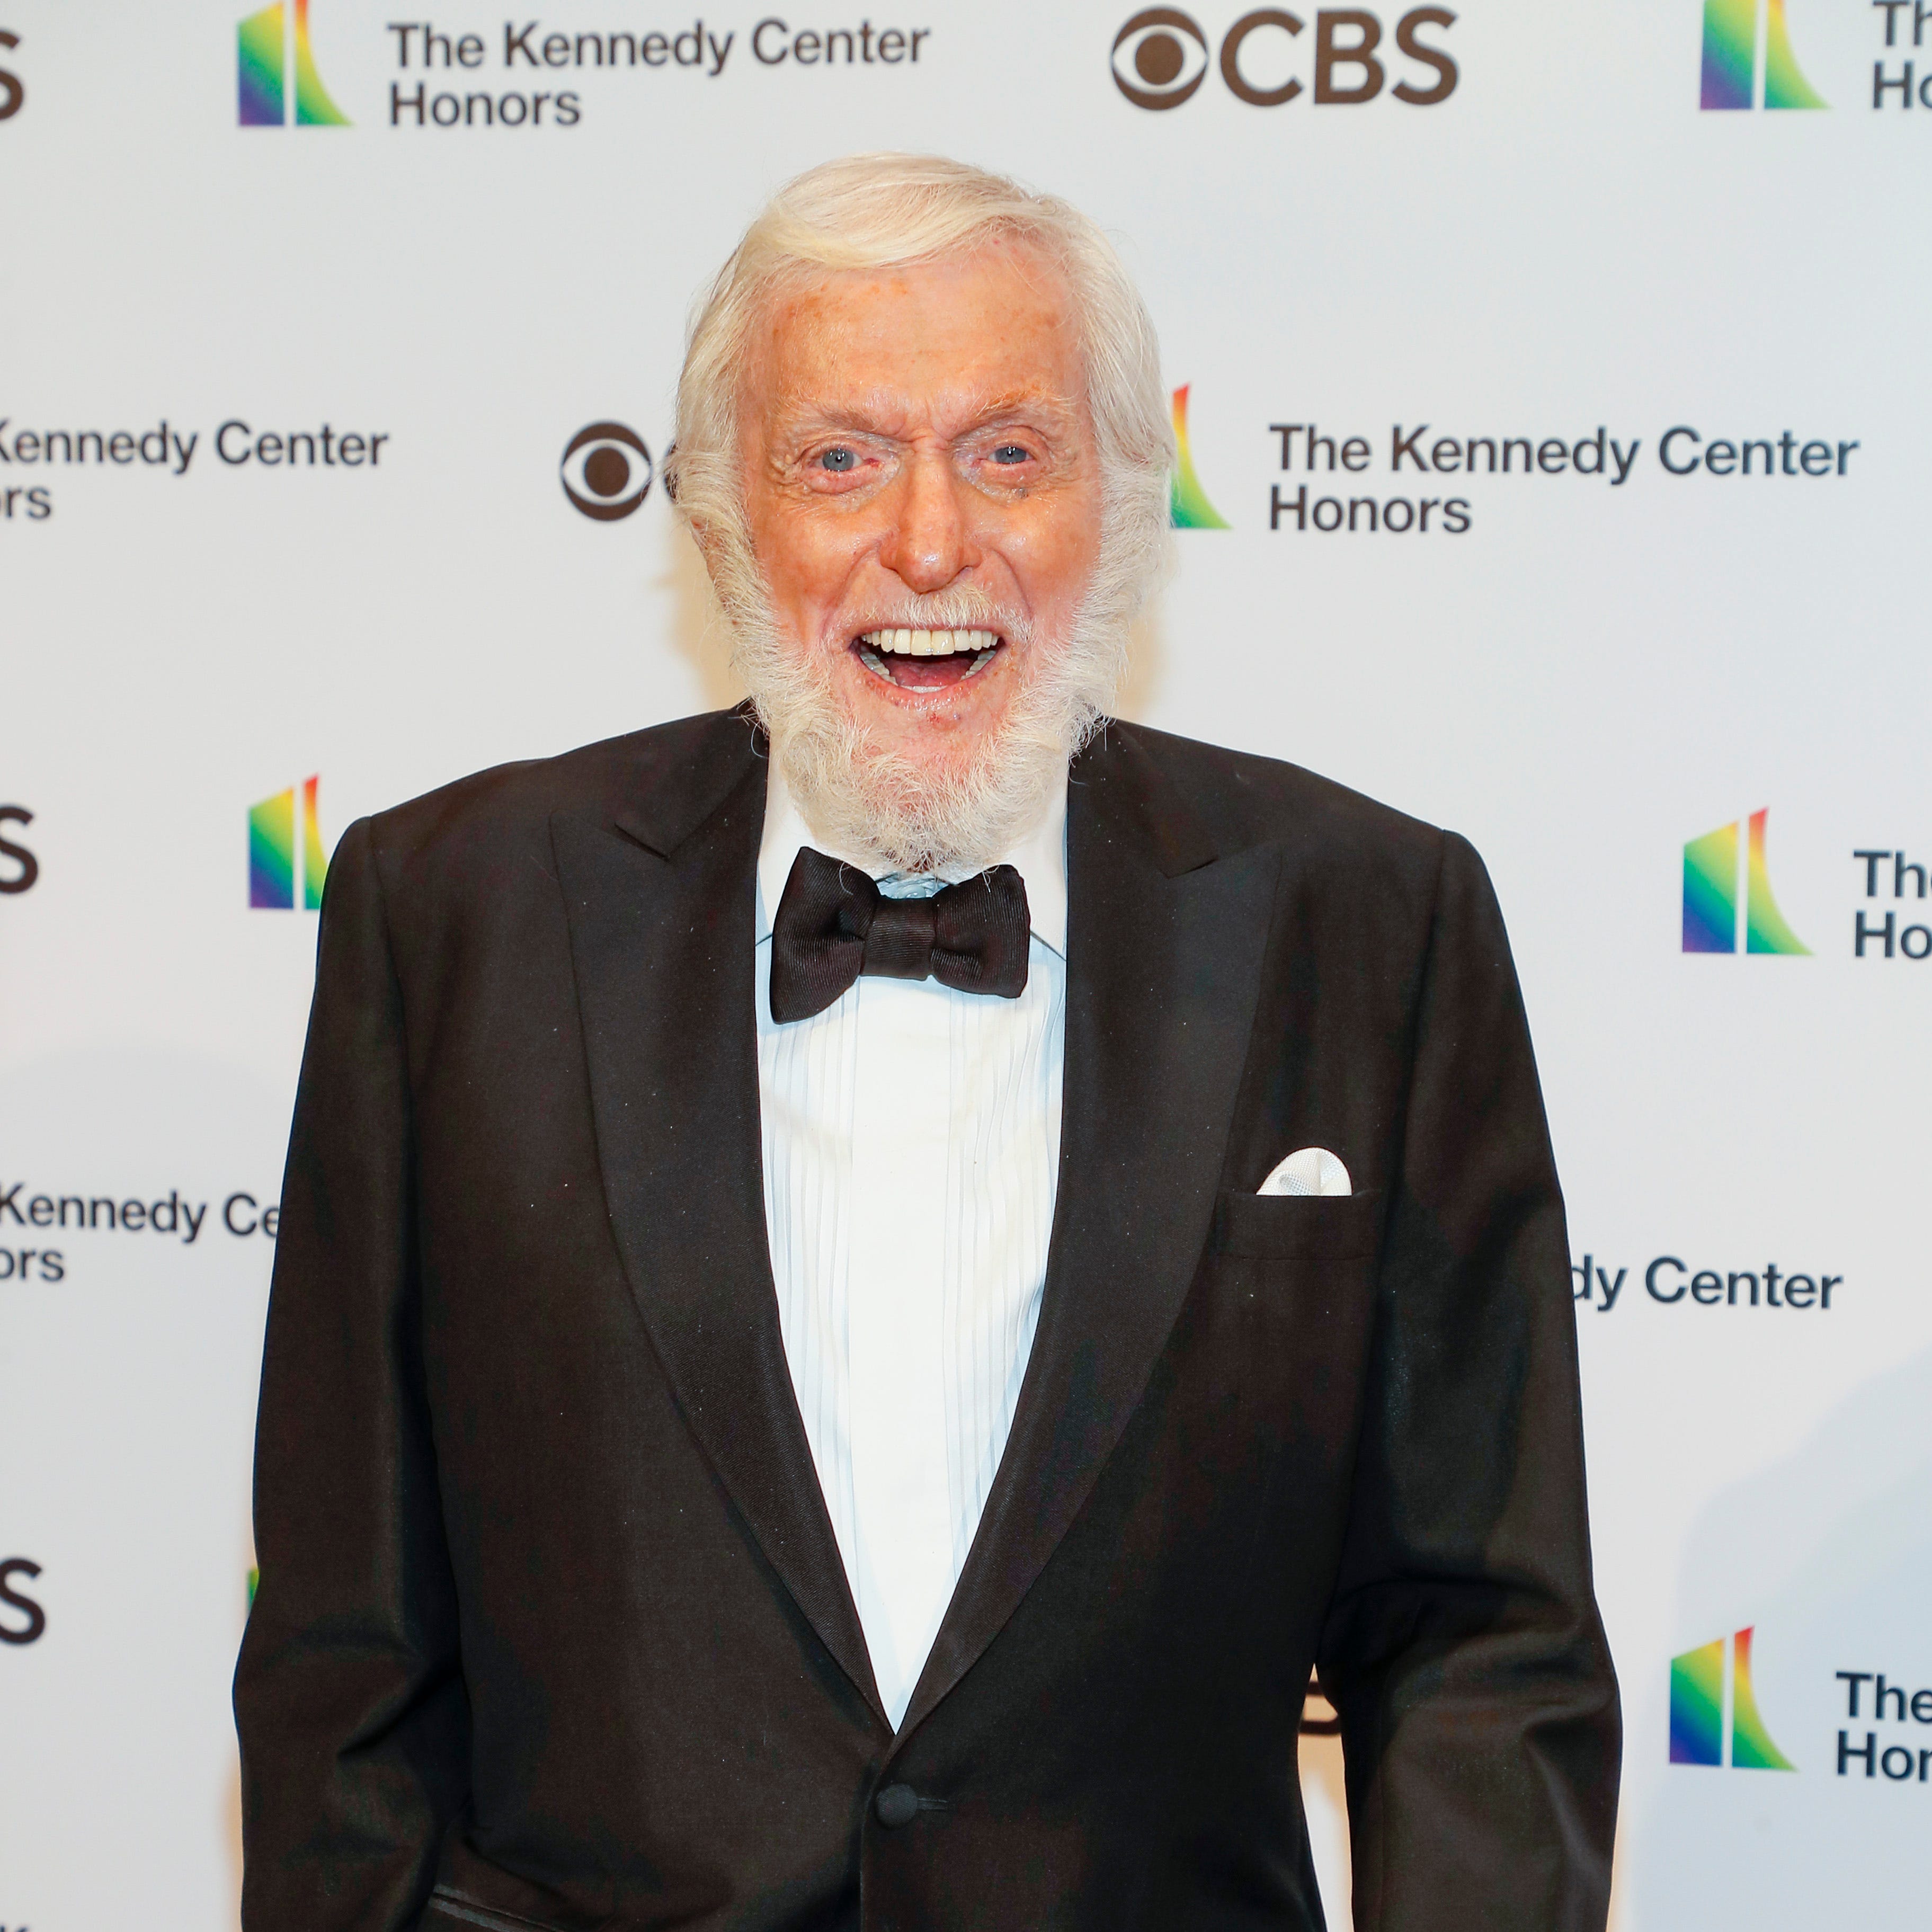 Dick Van Dyke was injured in a single-car crash on March 15 after colliding with a gate.